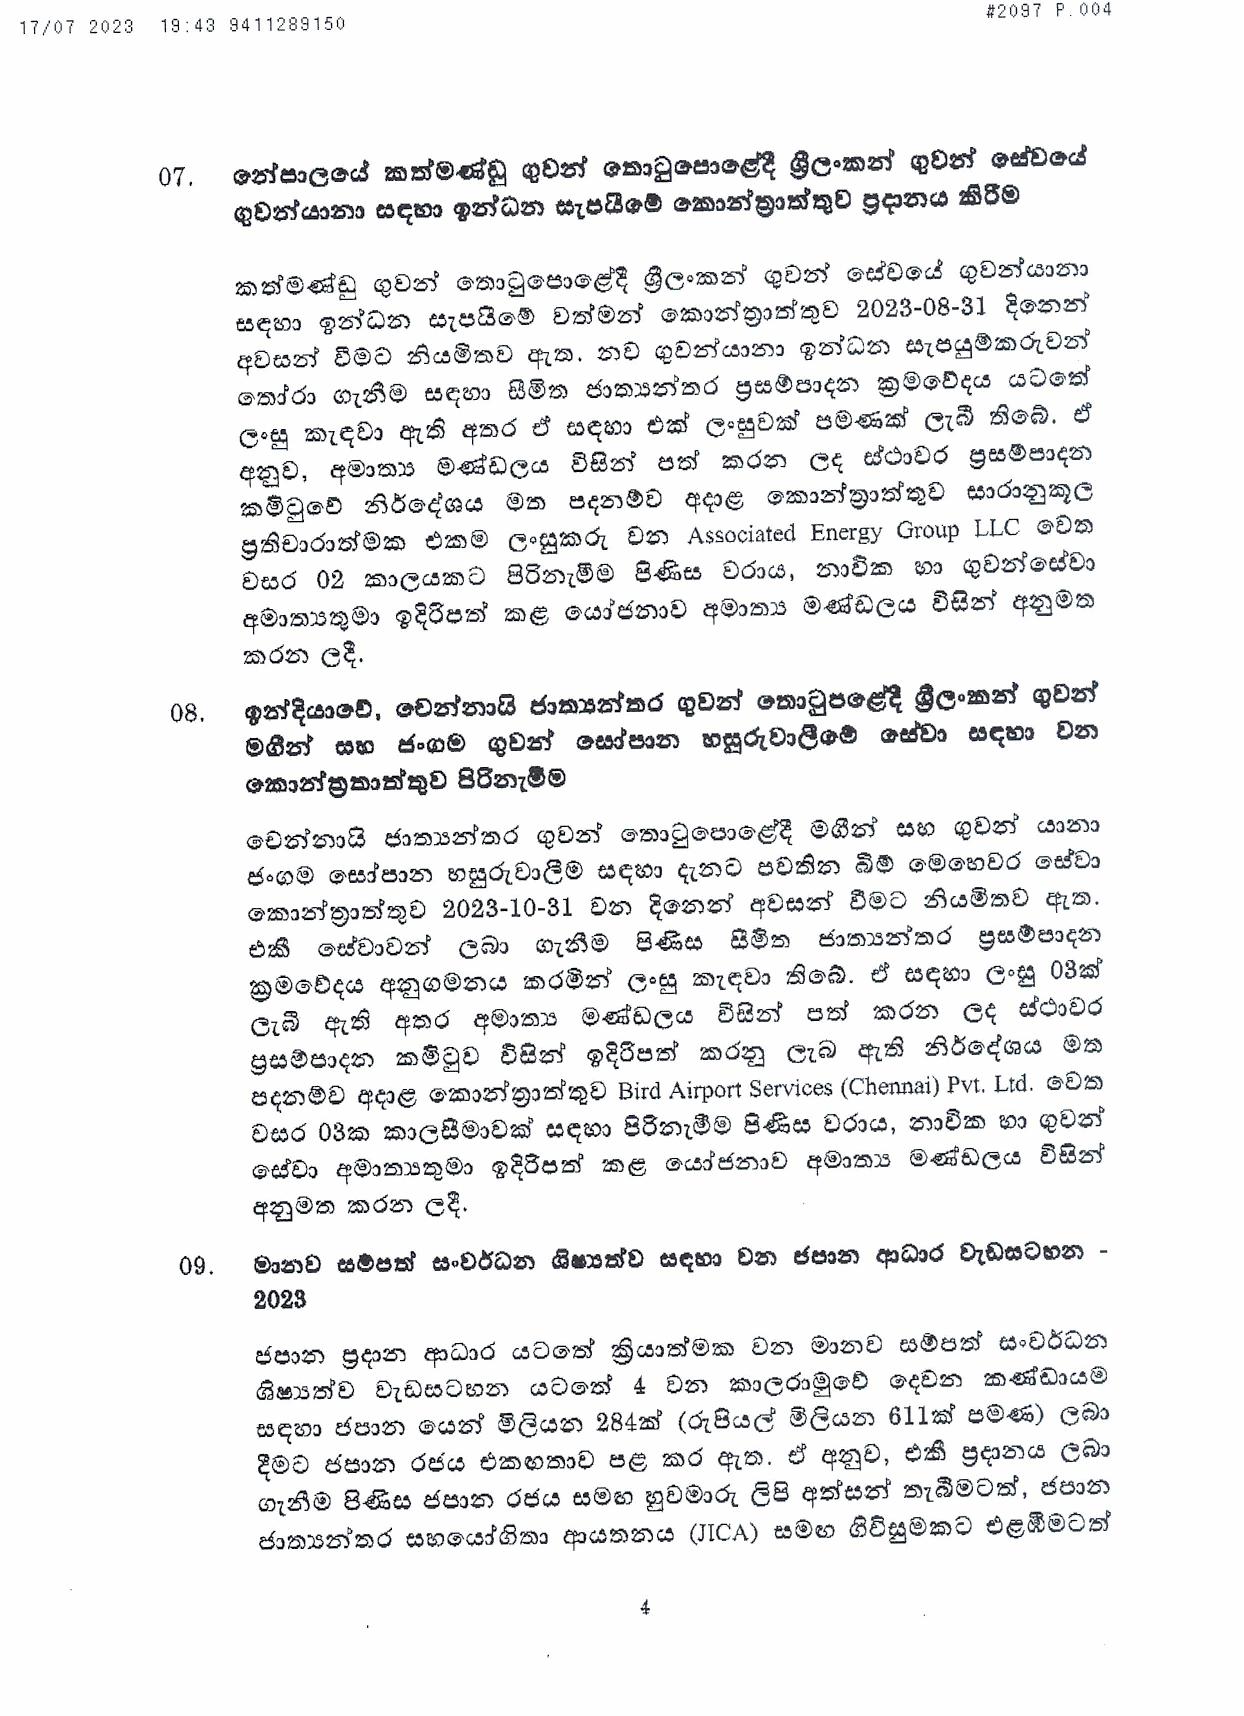 Cabinet Decision on 17.07.2023 page 004